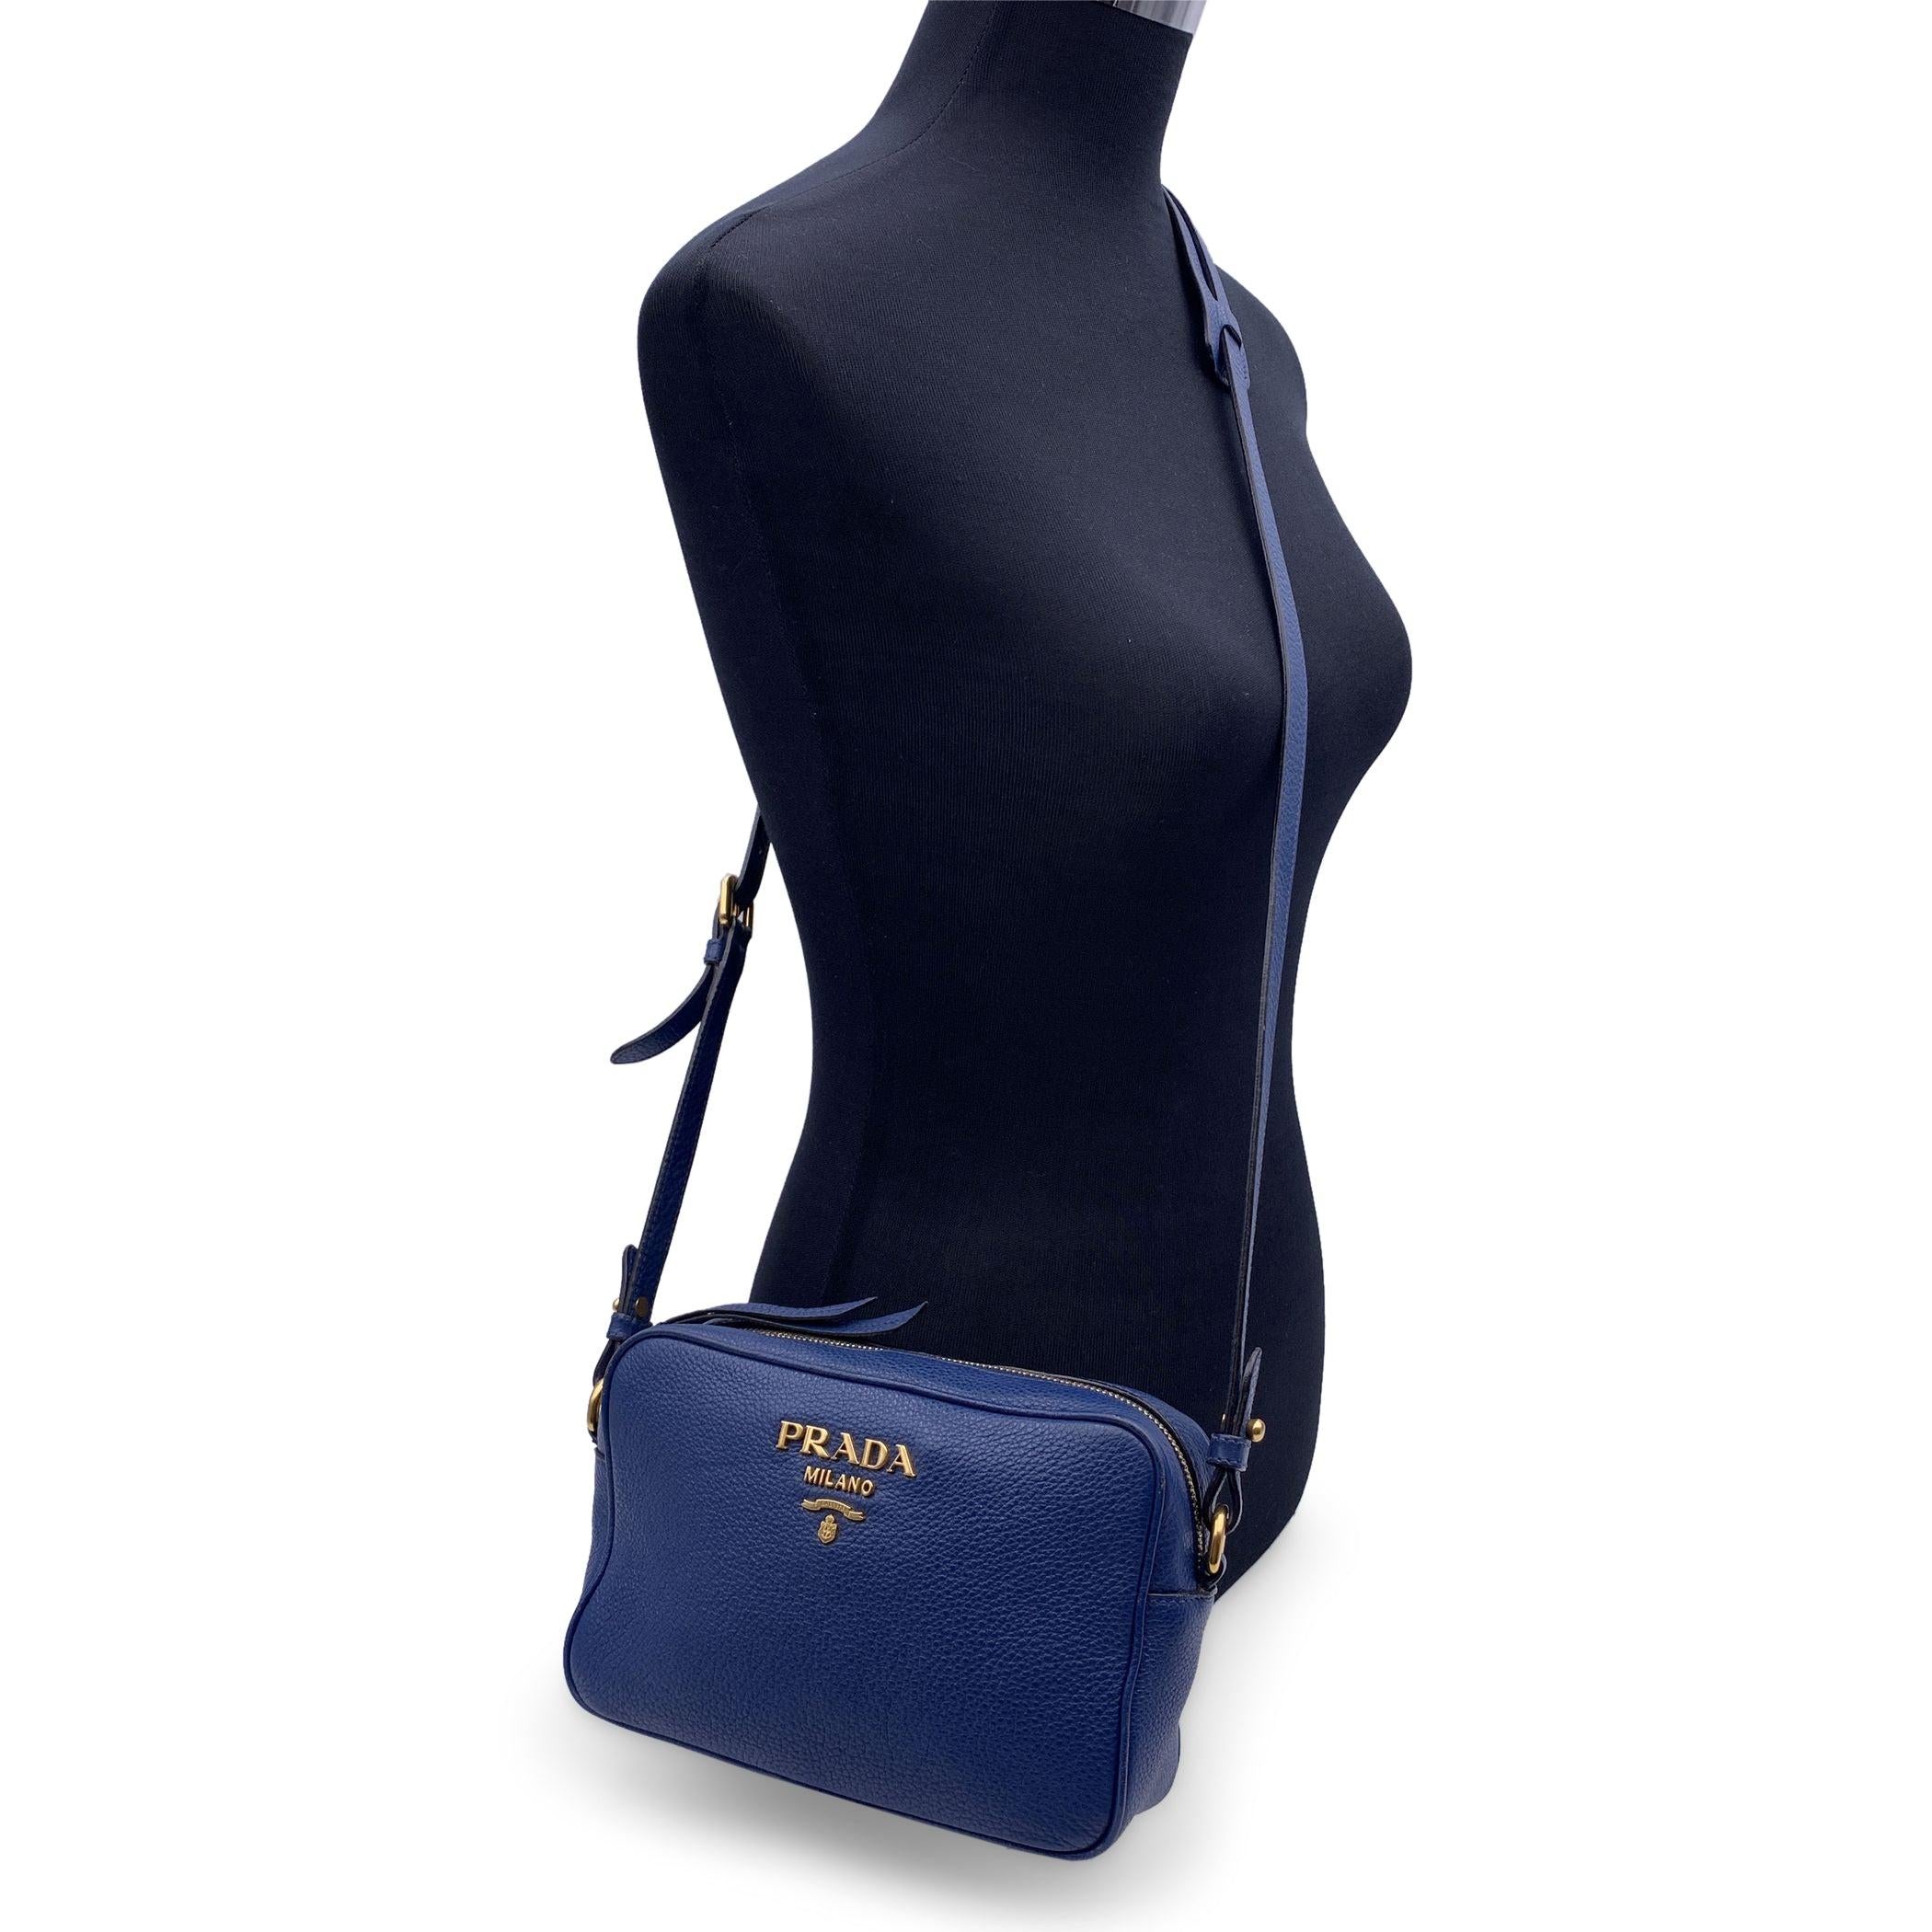 This beautiful Bag will come with a Certificate of Authenticity provided by Entrupy. The certificate will be provided at no further cost. PRADA blue Vitello Phenix leather crossbody bag, mod. 18H079. Gold metal Prada lettering on the front. Zip